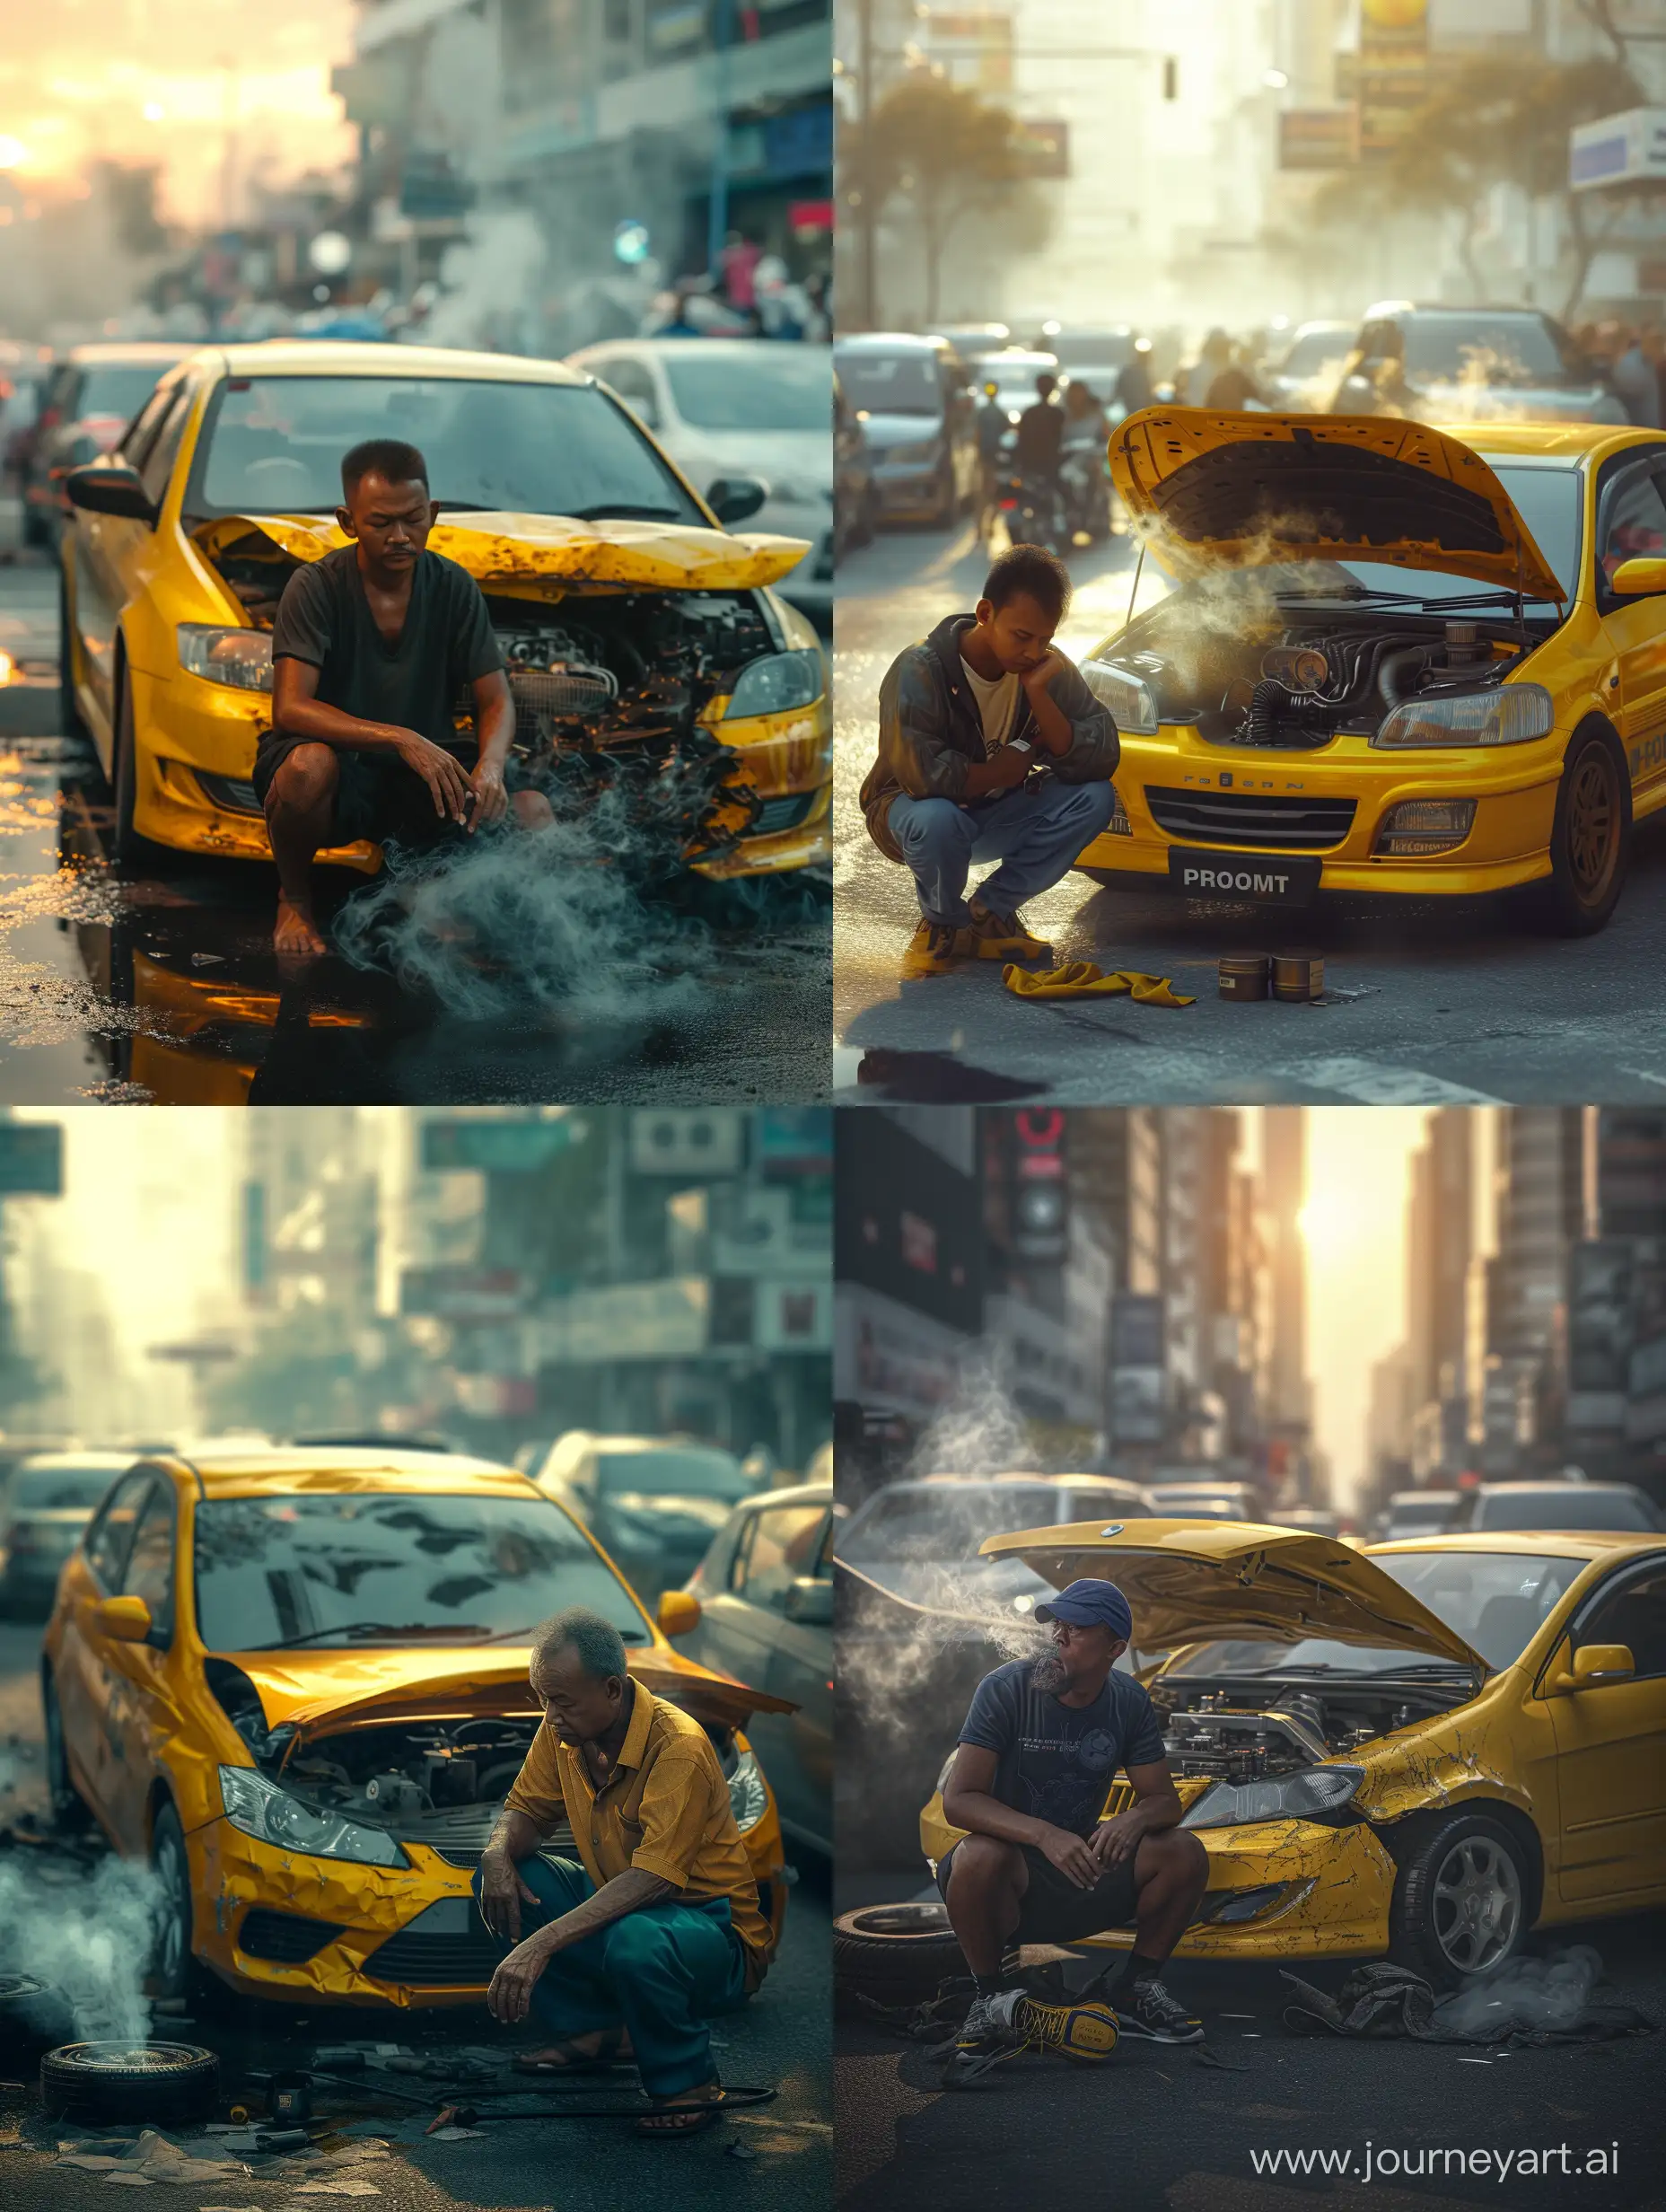 ultra realistic a malay man squatting next to his broken down car. The front bonnet was open and there was smoke coming out of the car engine. Proton brand car made in Malaysia is yellow. refraction of the morning sun. crowded city background with cars.